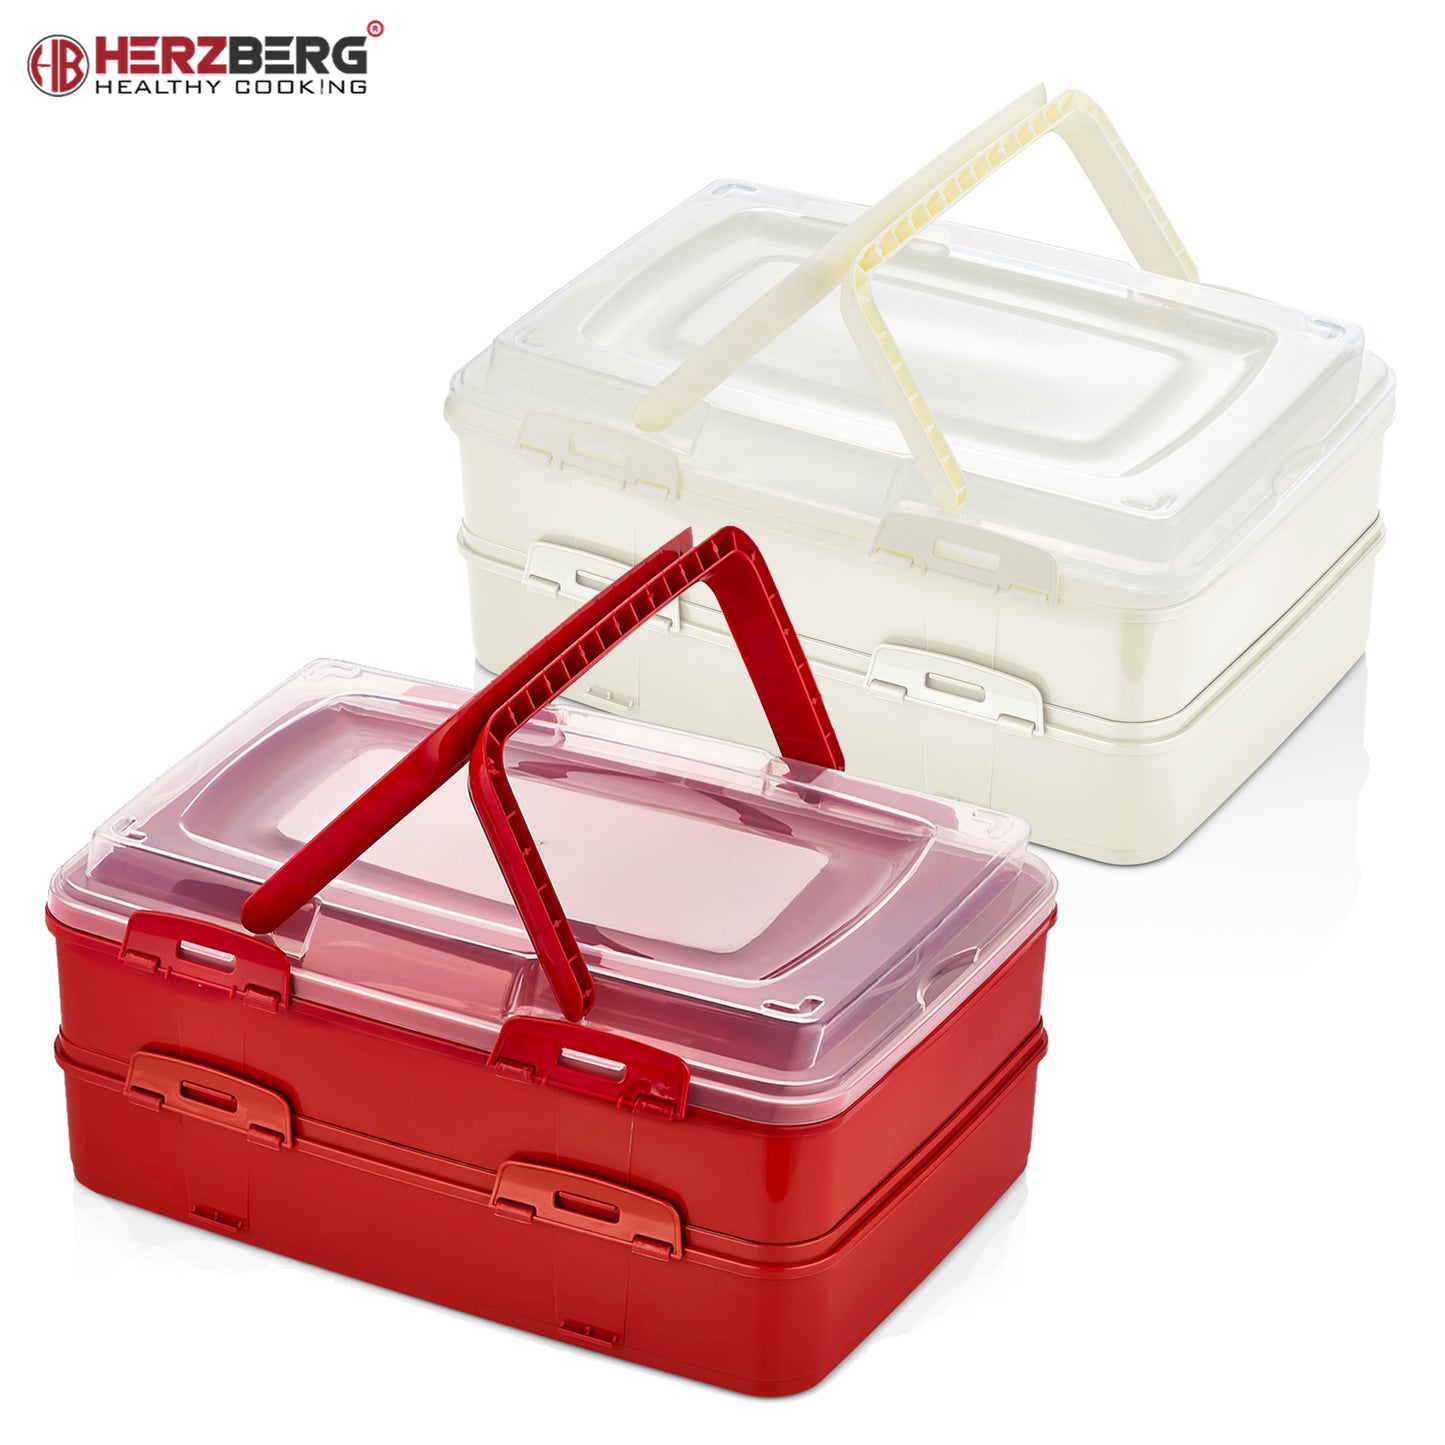 Herzberg Duplex Takeaway Pastry Carrying Box Red